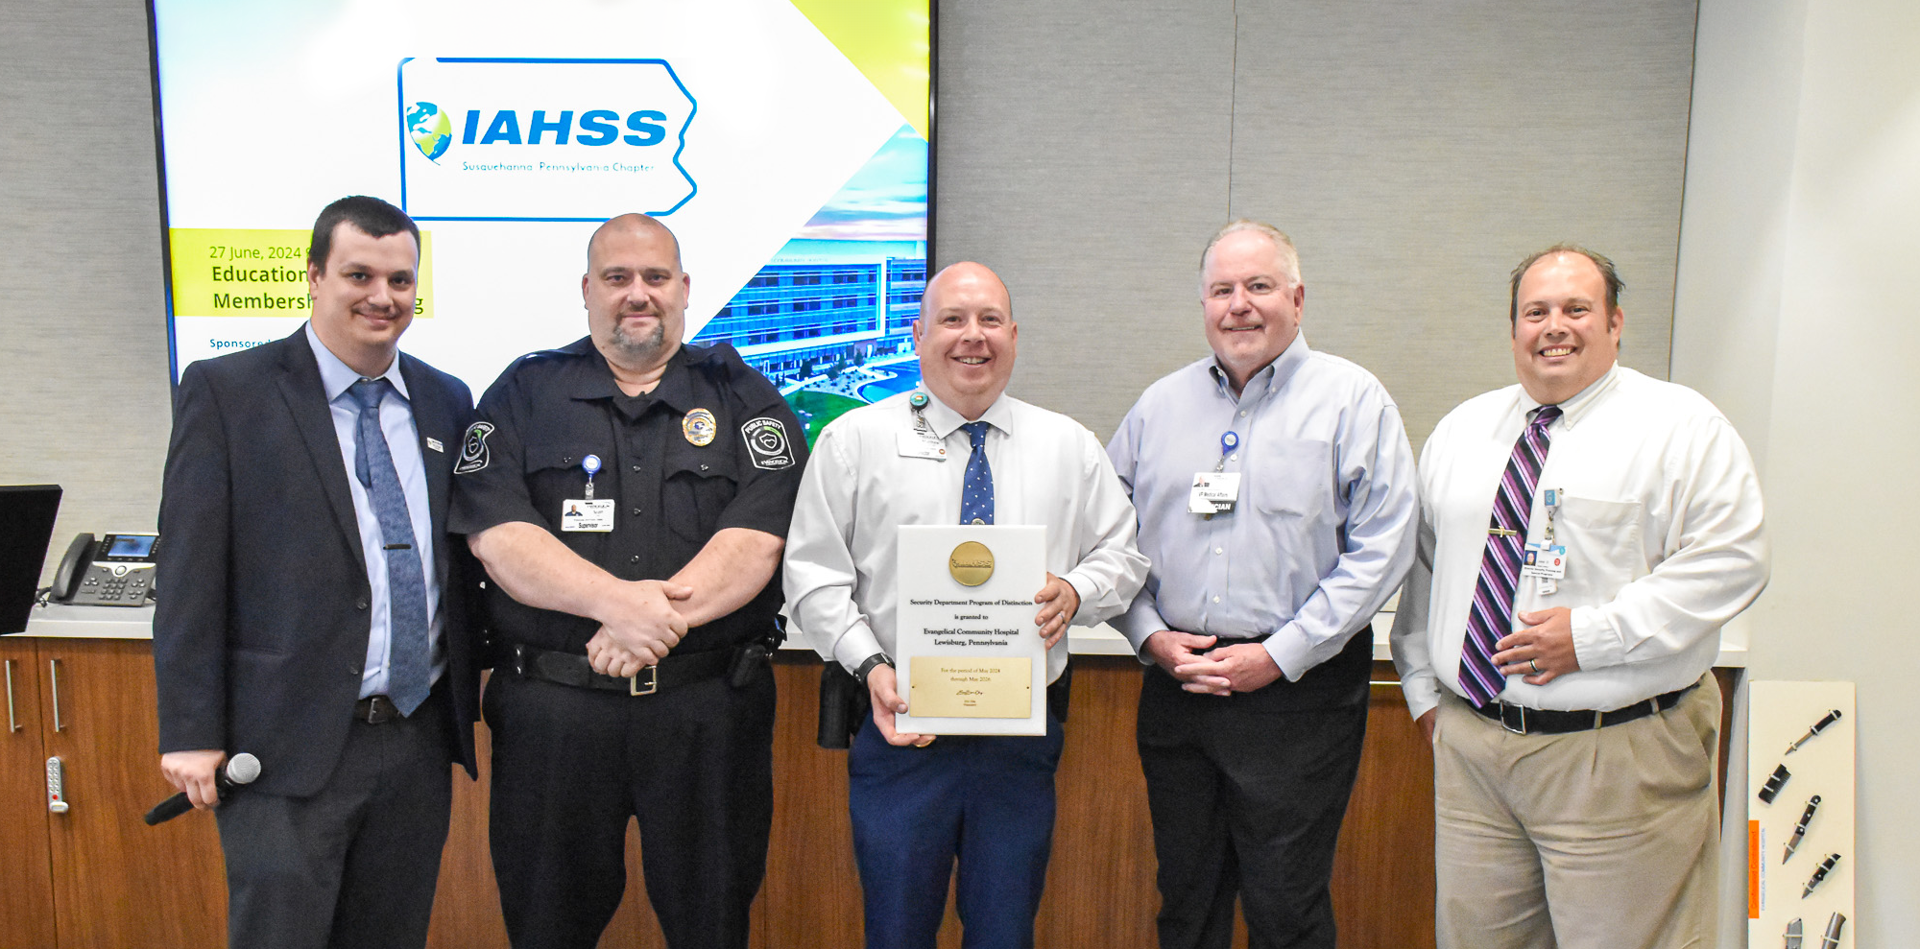 Evangelical Community Hospital’s Employee and Public Safety Deemed Program of Distinction 